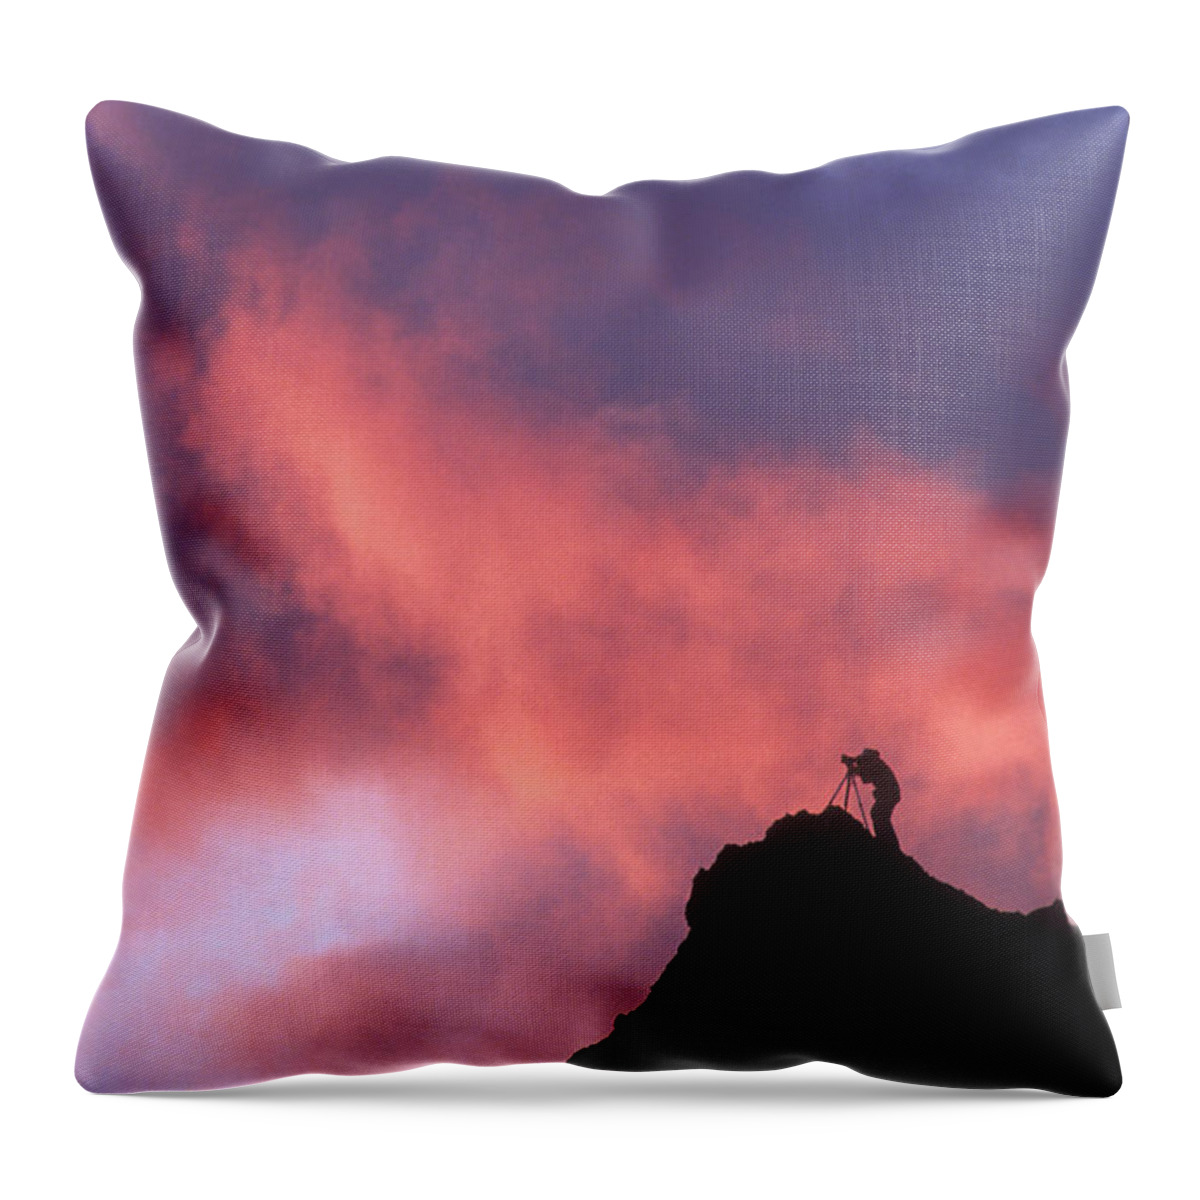 35mm Transparency Throw Pillow featuring the photograph Untitled #2 by WorldFoto